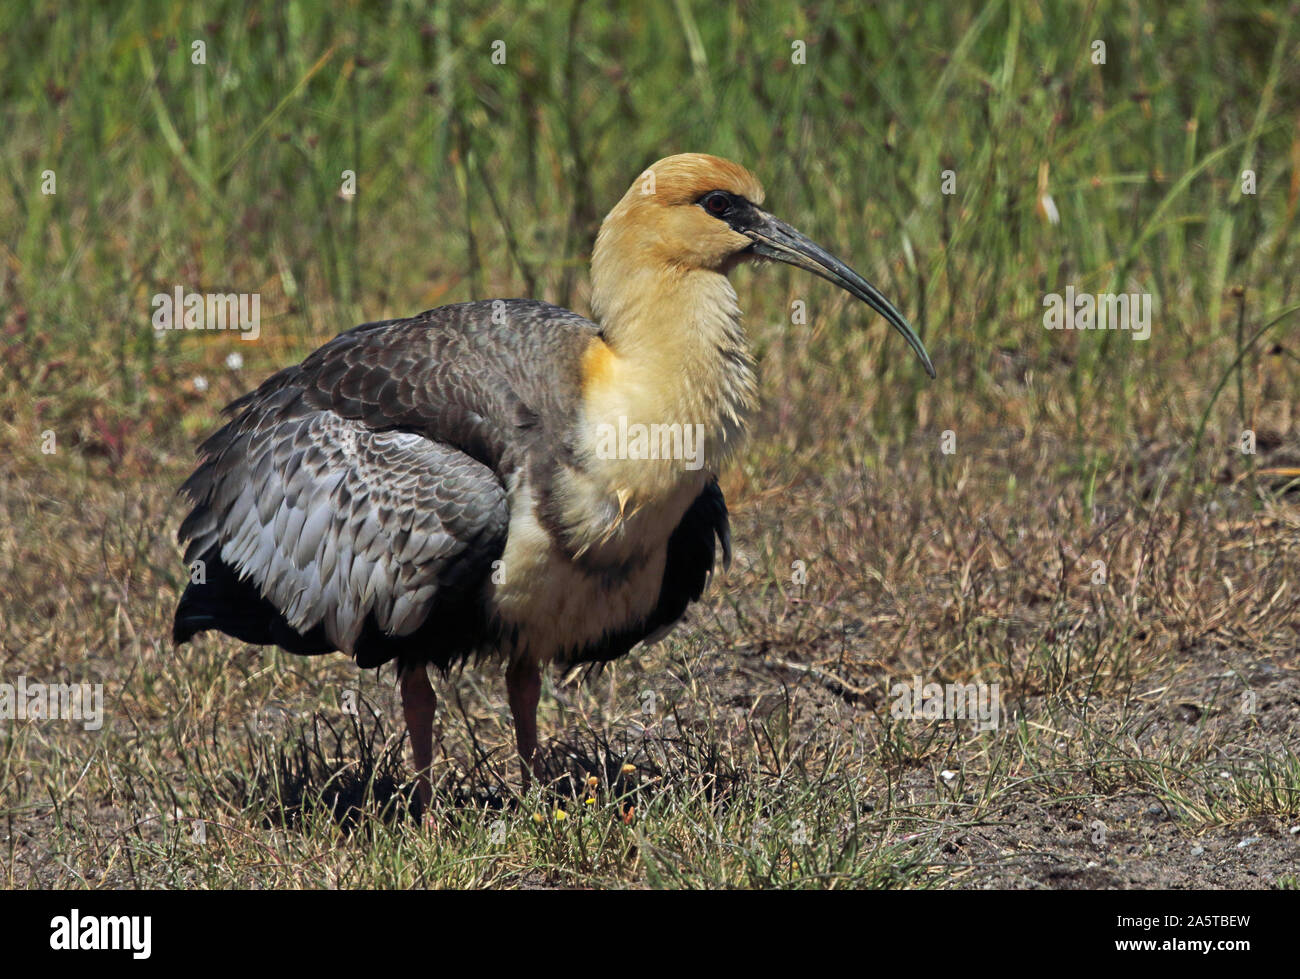 Black-faced Ibis (Theristicus melanopis) adult standing on grass, fluffed up after preening  Puerto Montt, Chile                    January Stock Photo